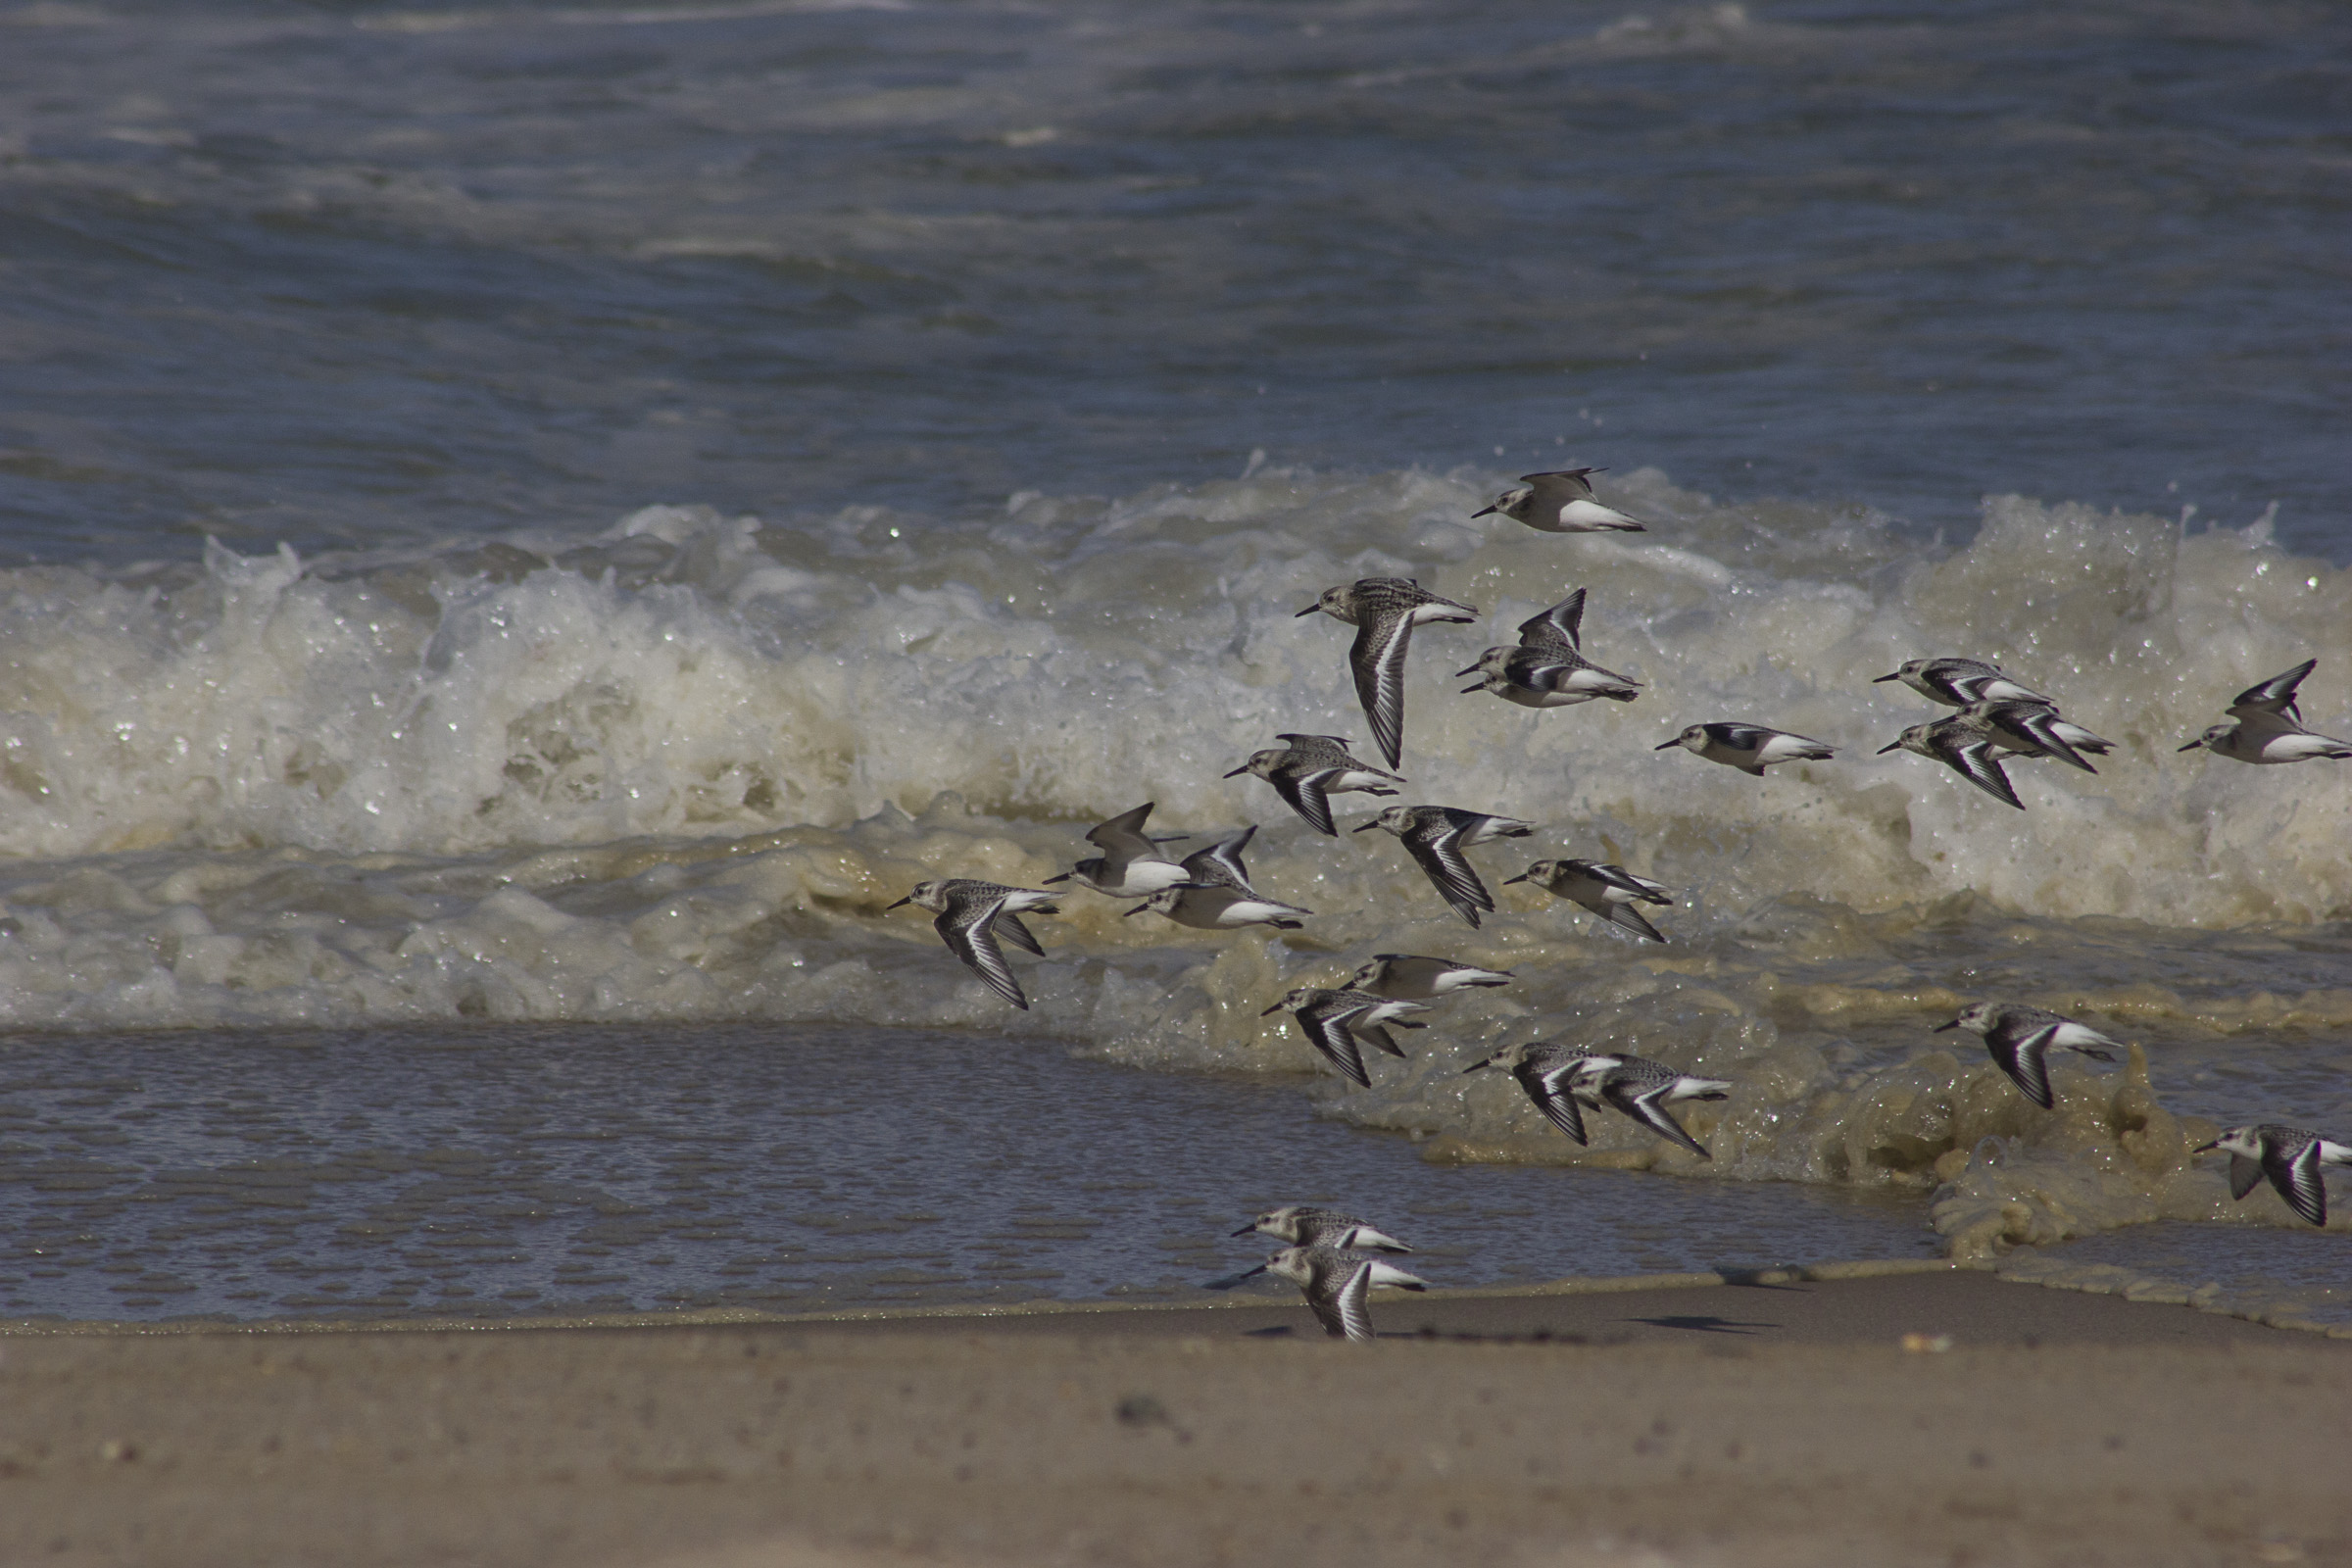 A flock of birds flies along a beach with waves in the background.